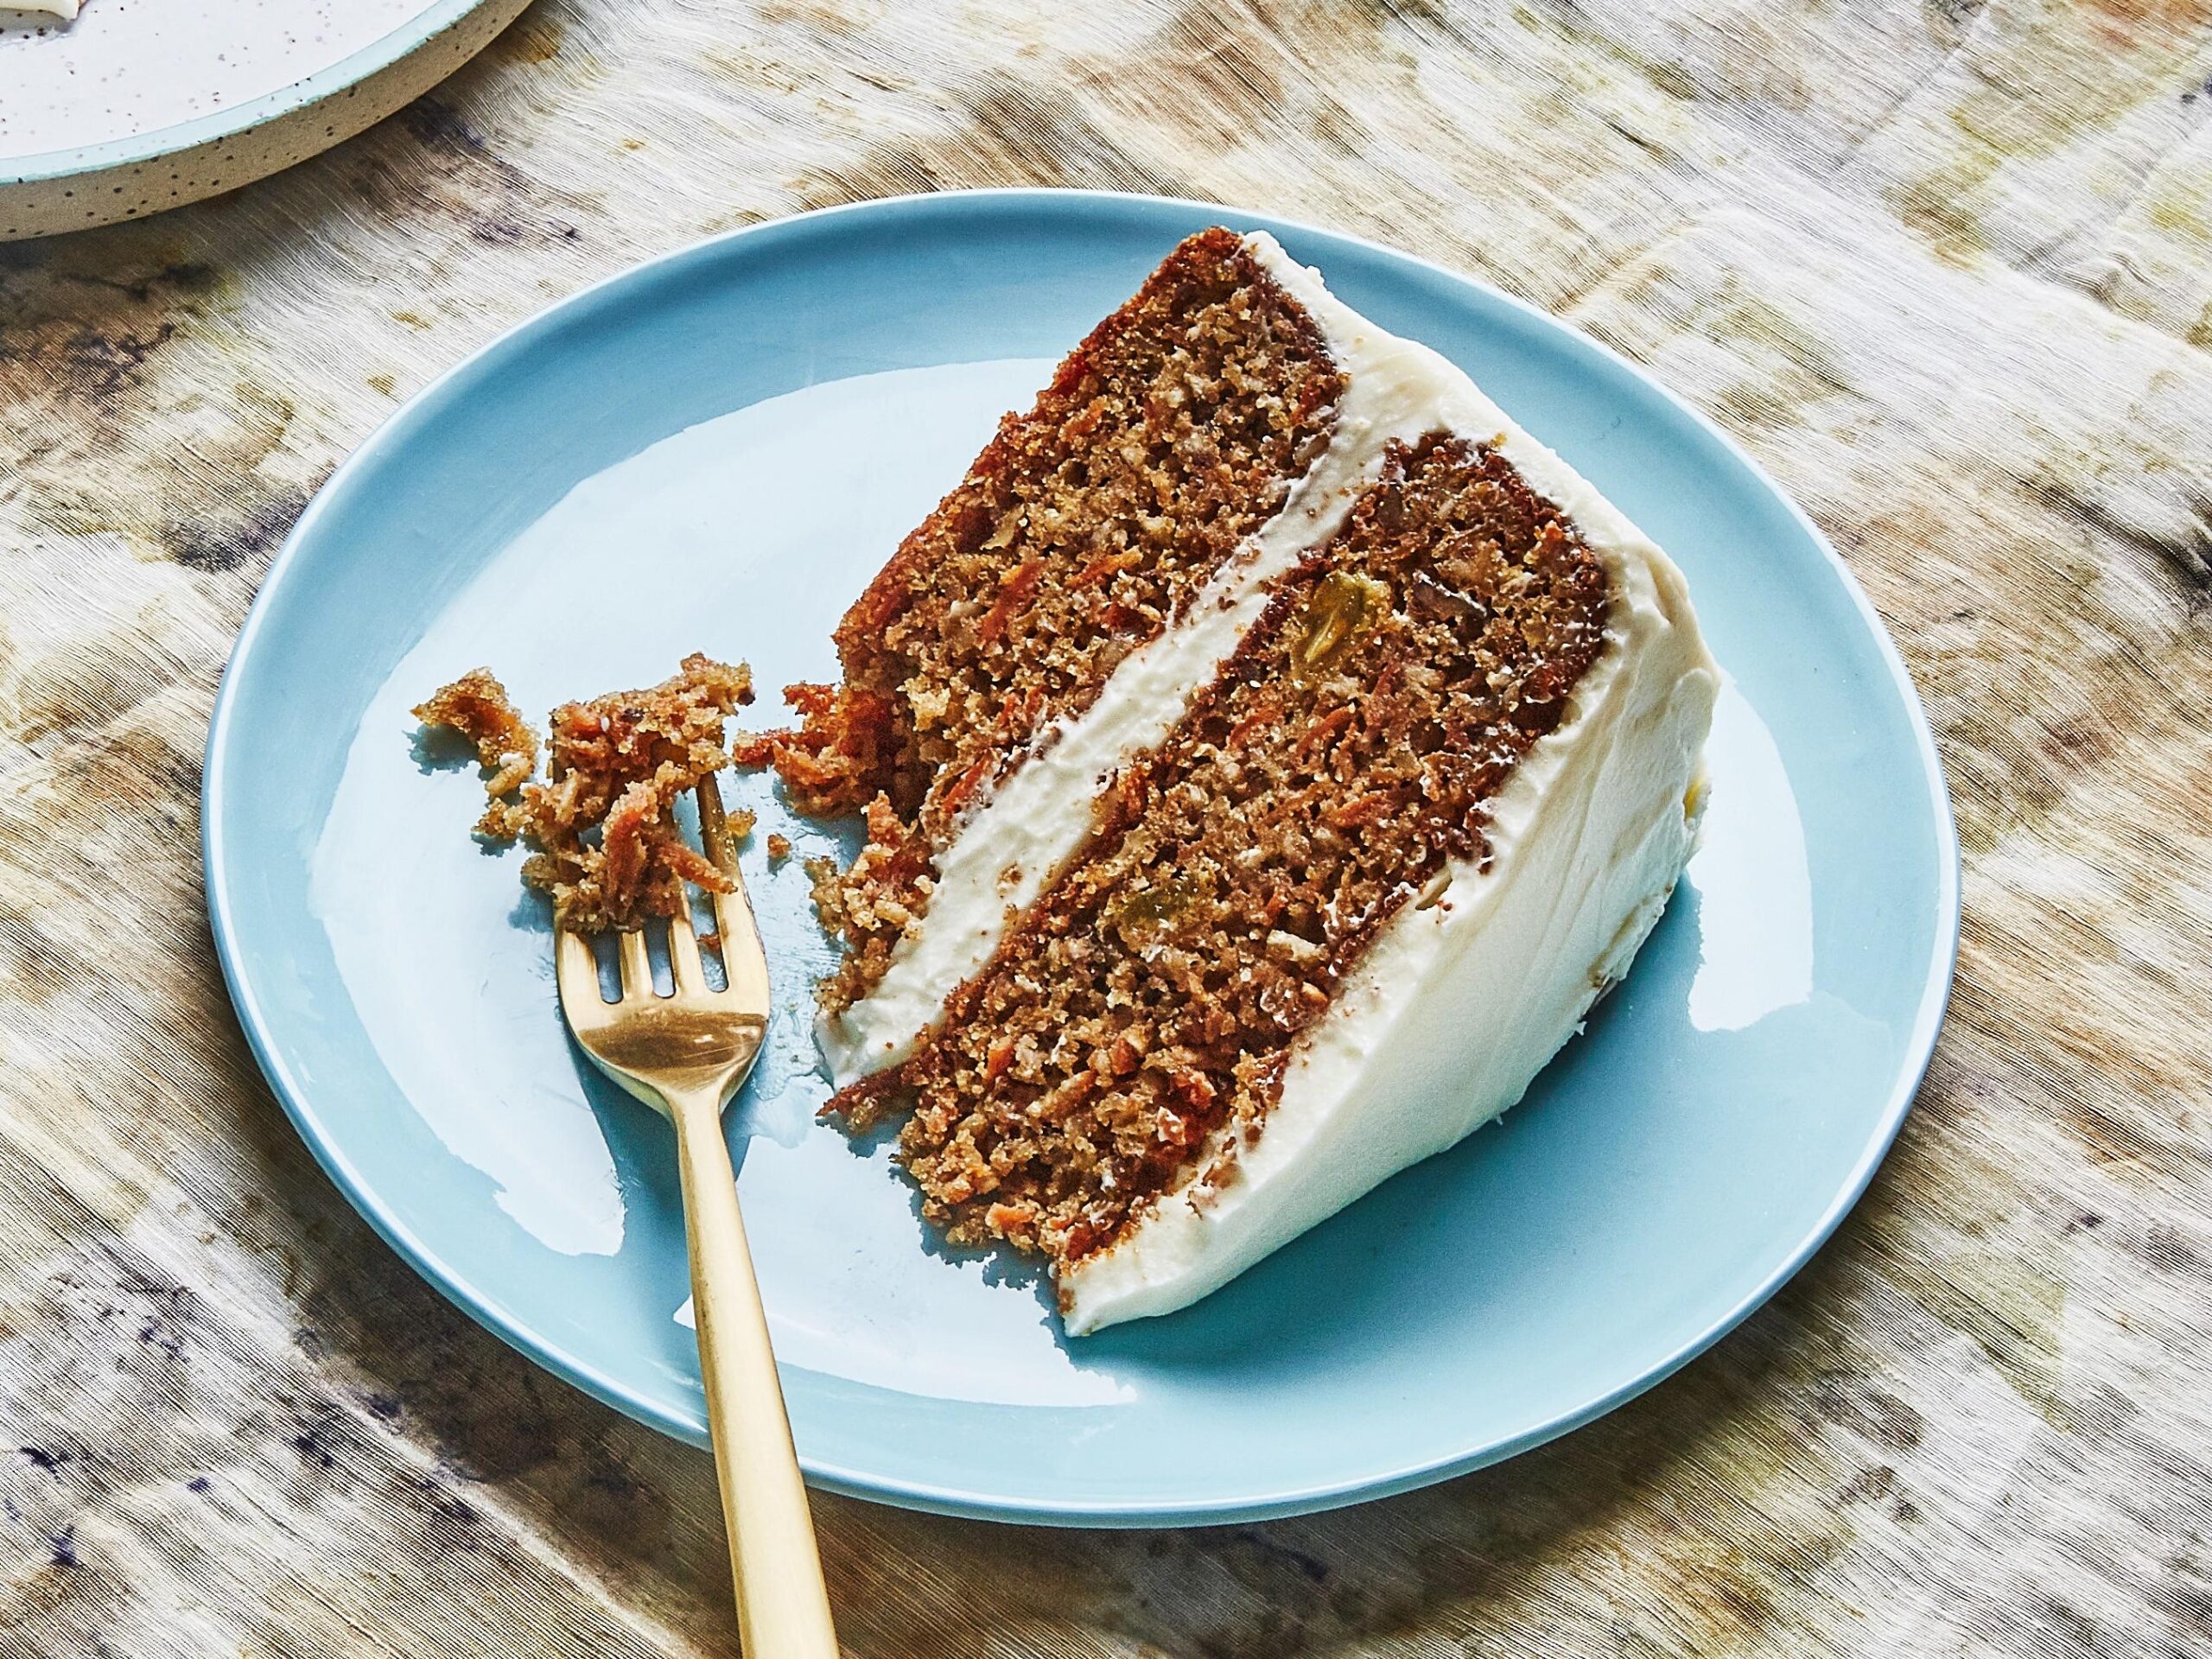  A Delicious Twist on the Classic Carrot Cake.